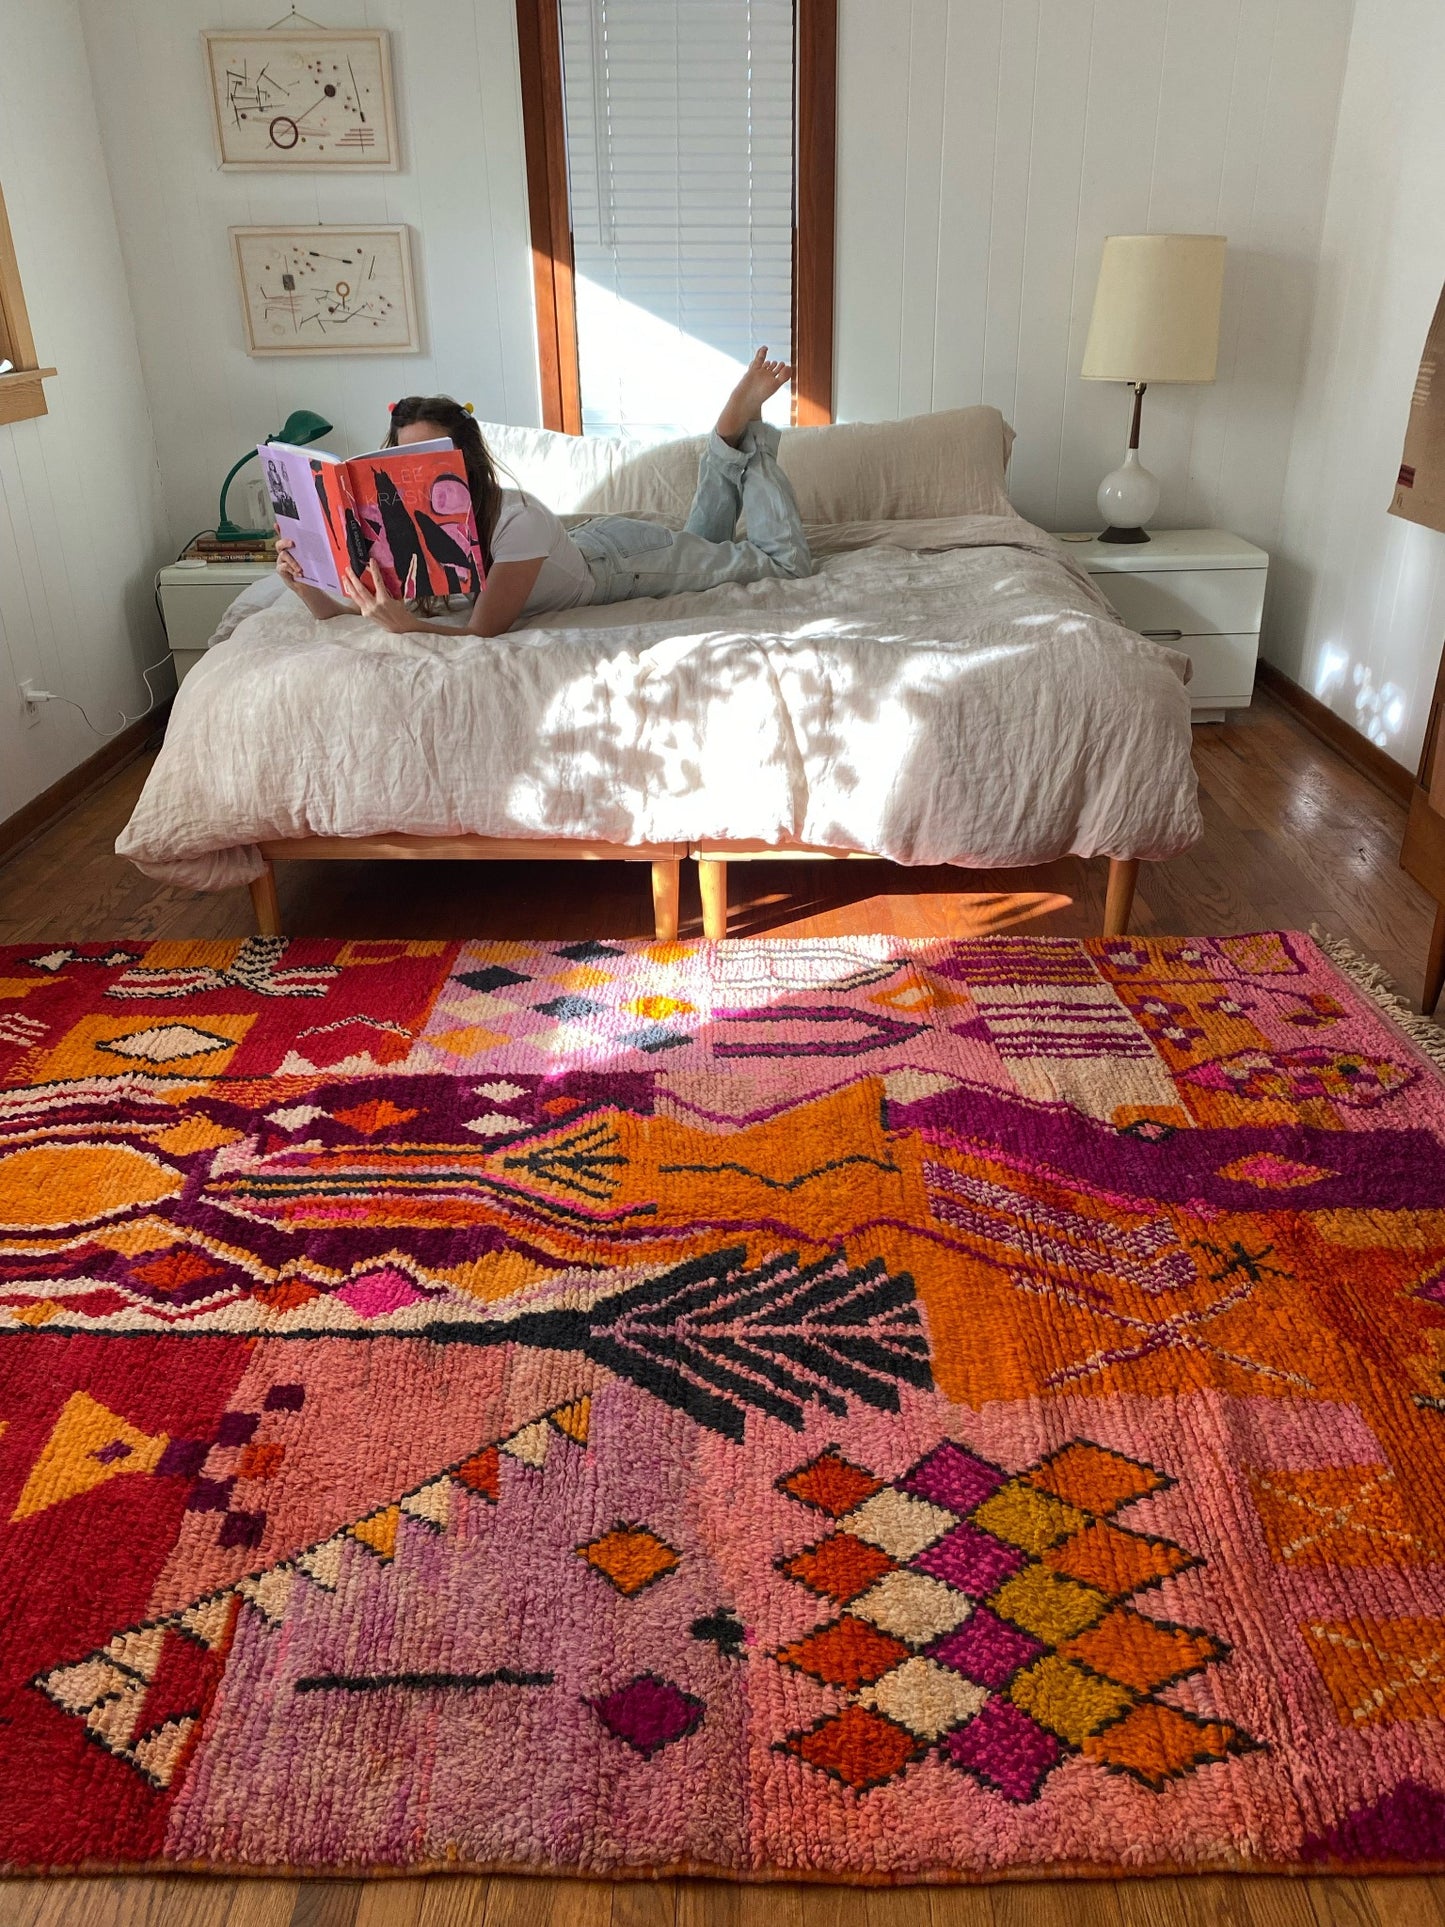 See Wedelia Moroccan Rug Styled in a Bedroom